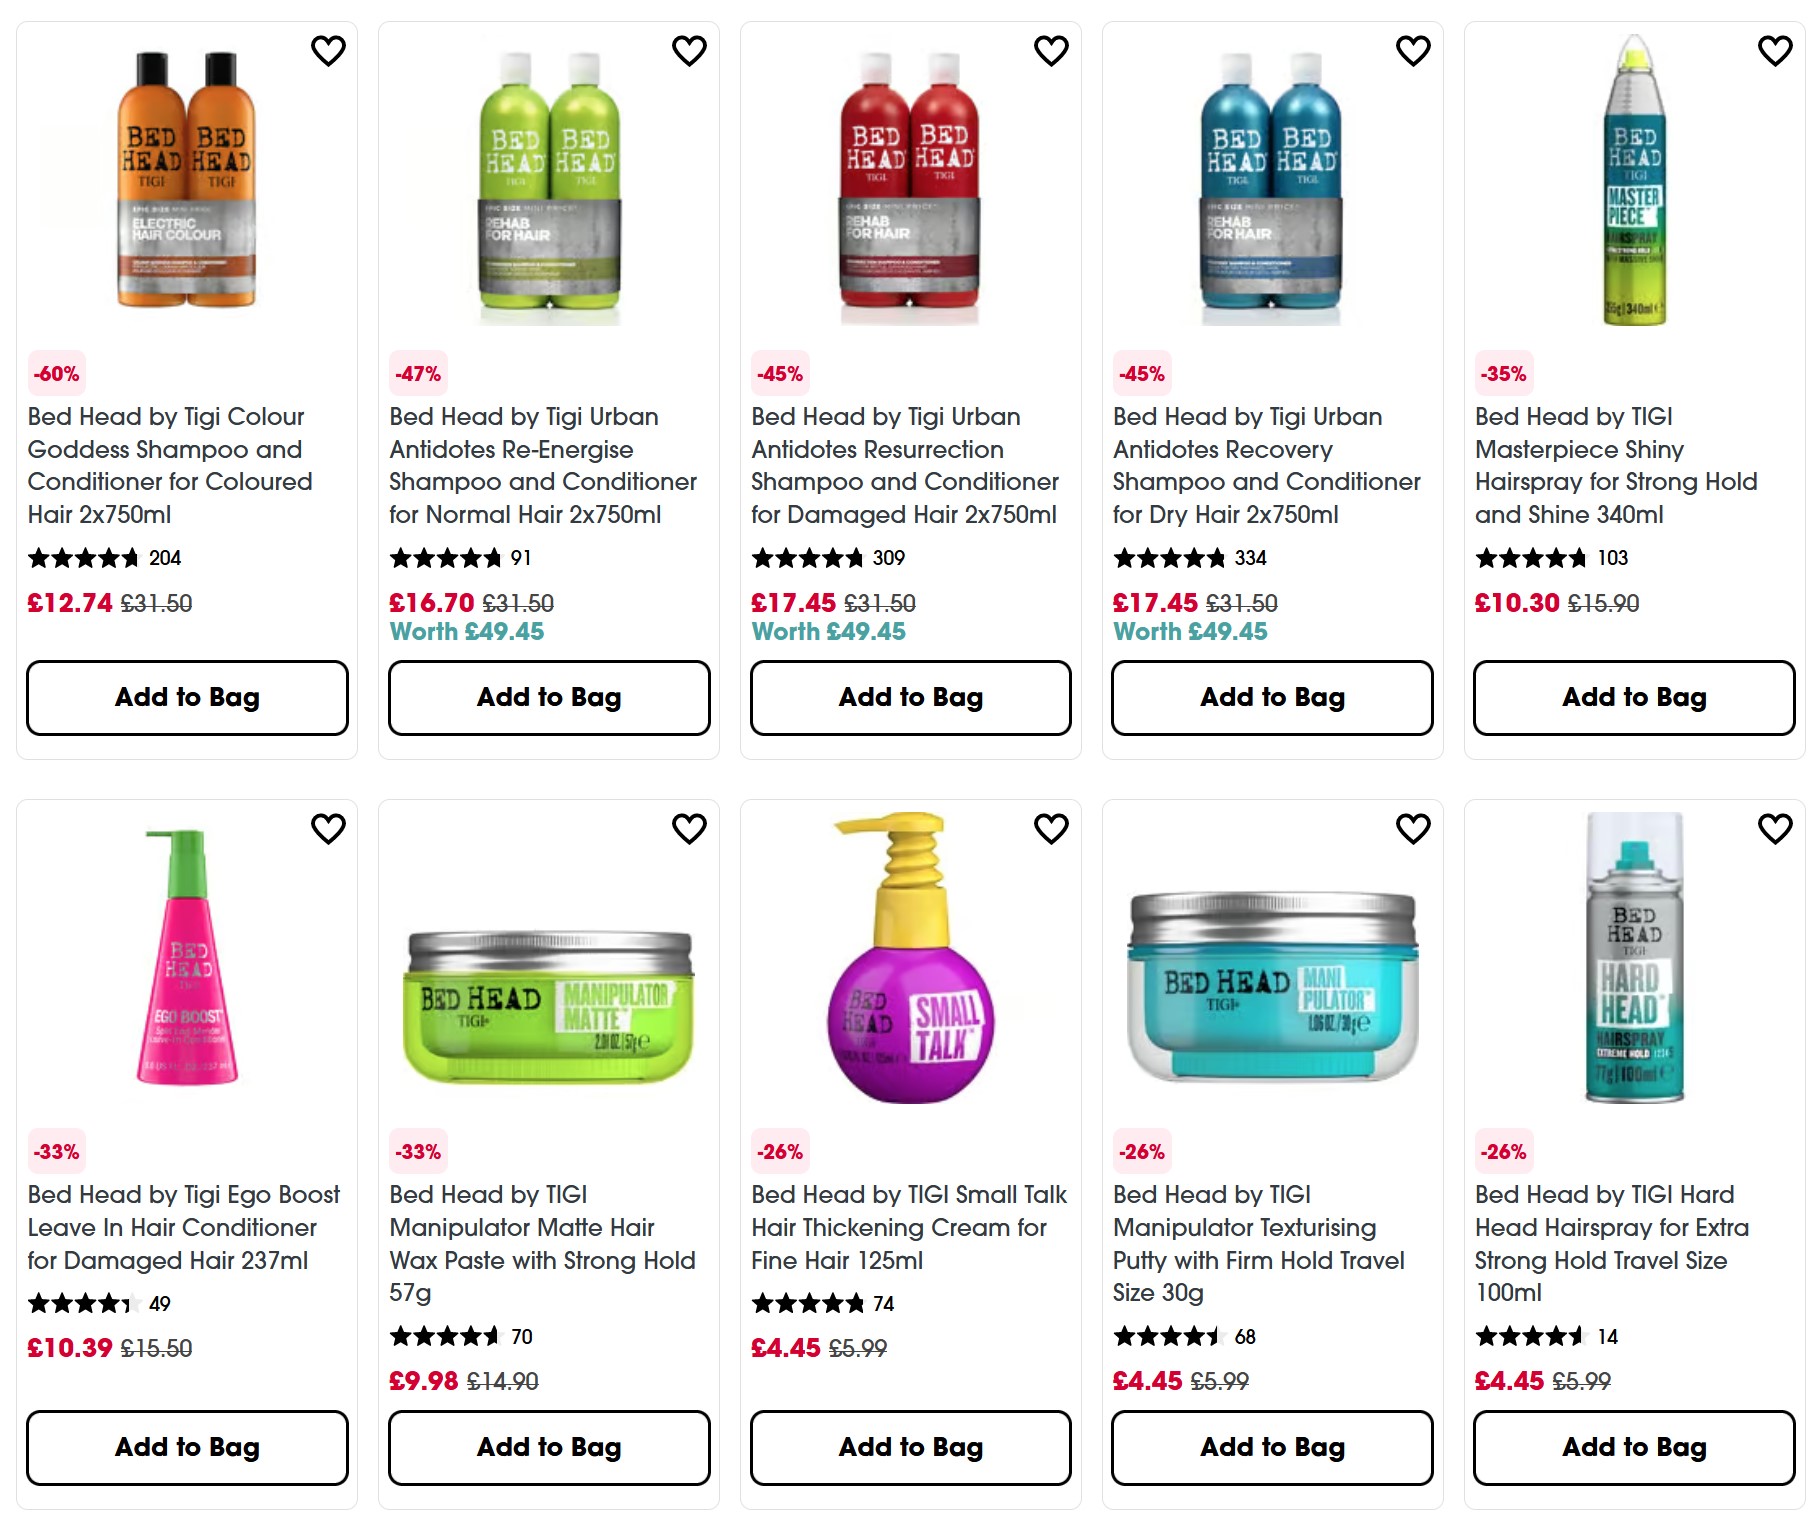 Up to 60% off Bed Head by Tigi at Sephora UK